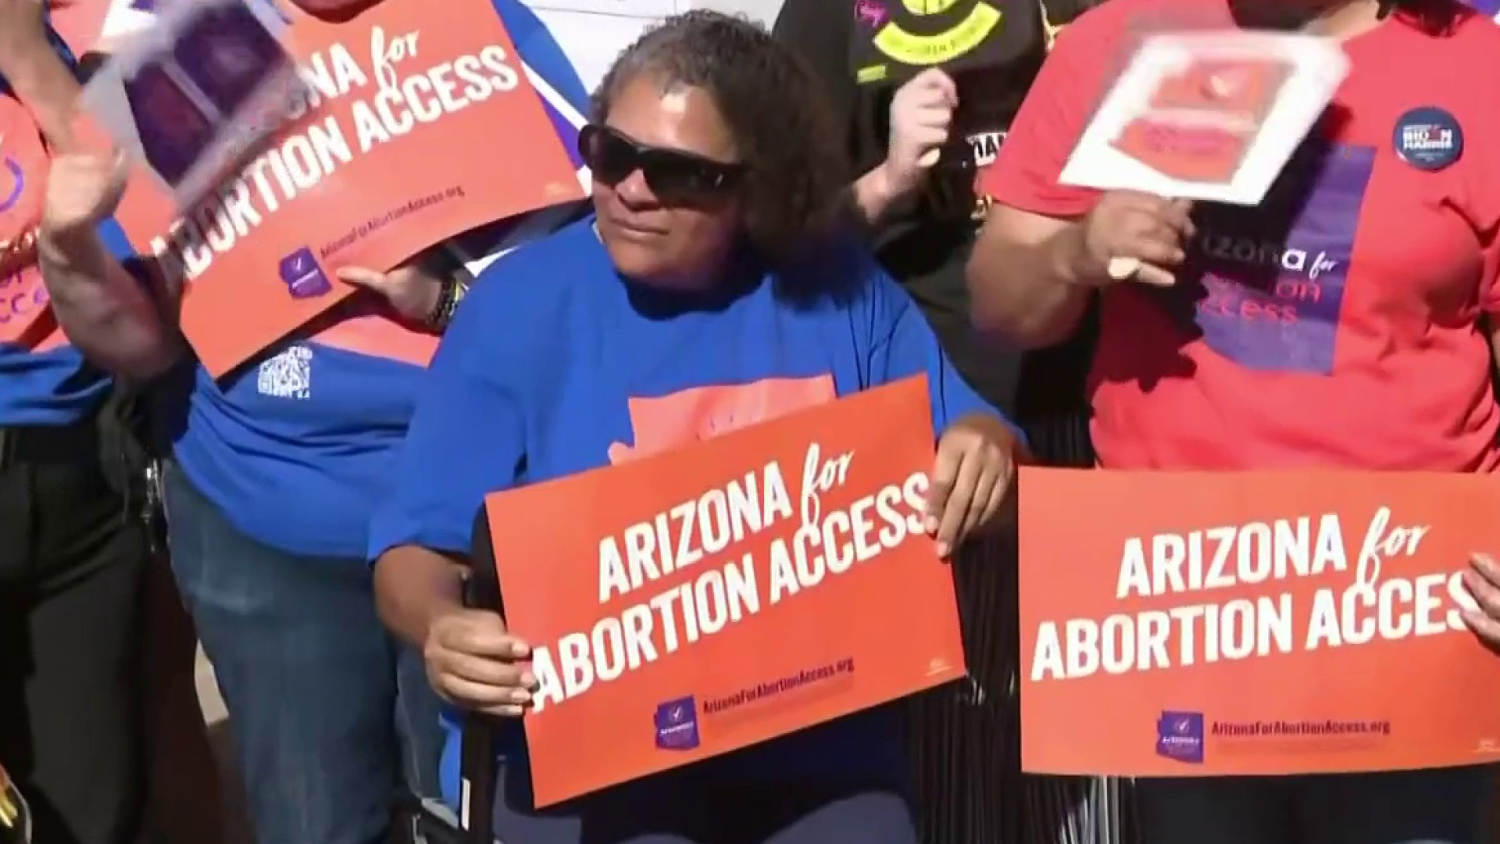 Advocacy groups gather ‘historic haul’ of signatures to put abortion rights on Arizona’s ballot